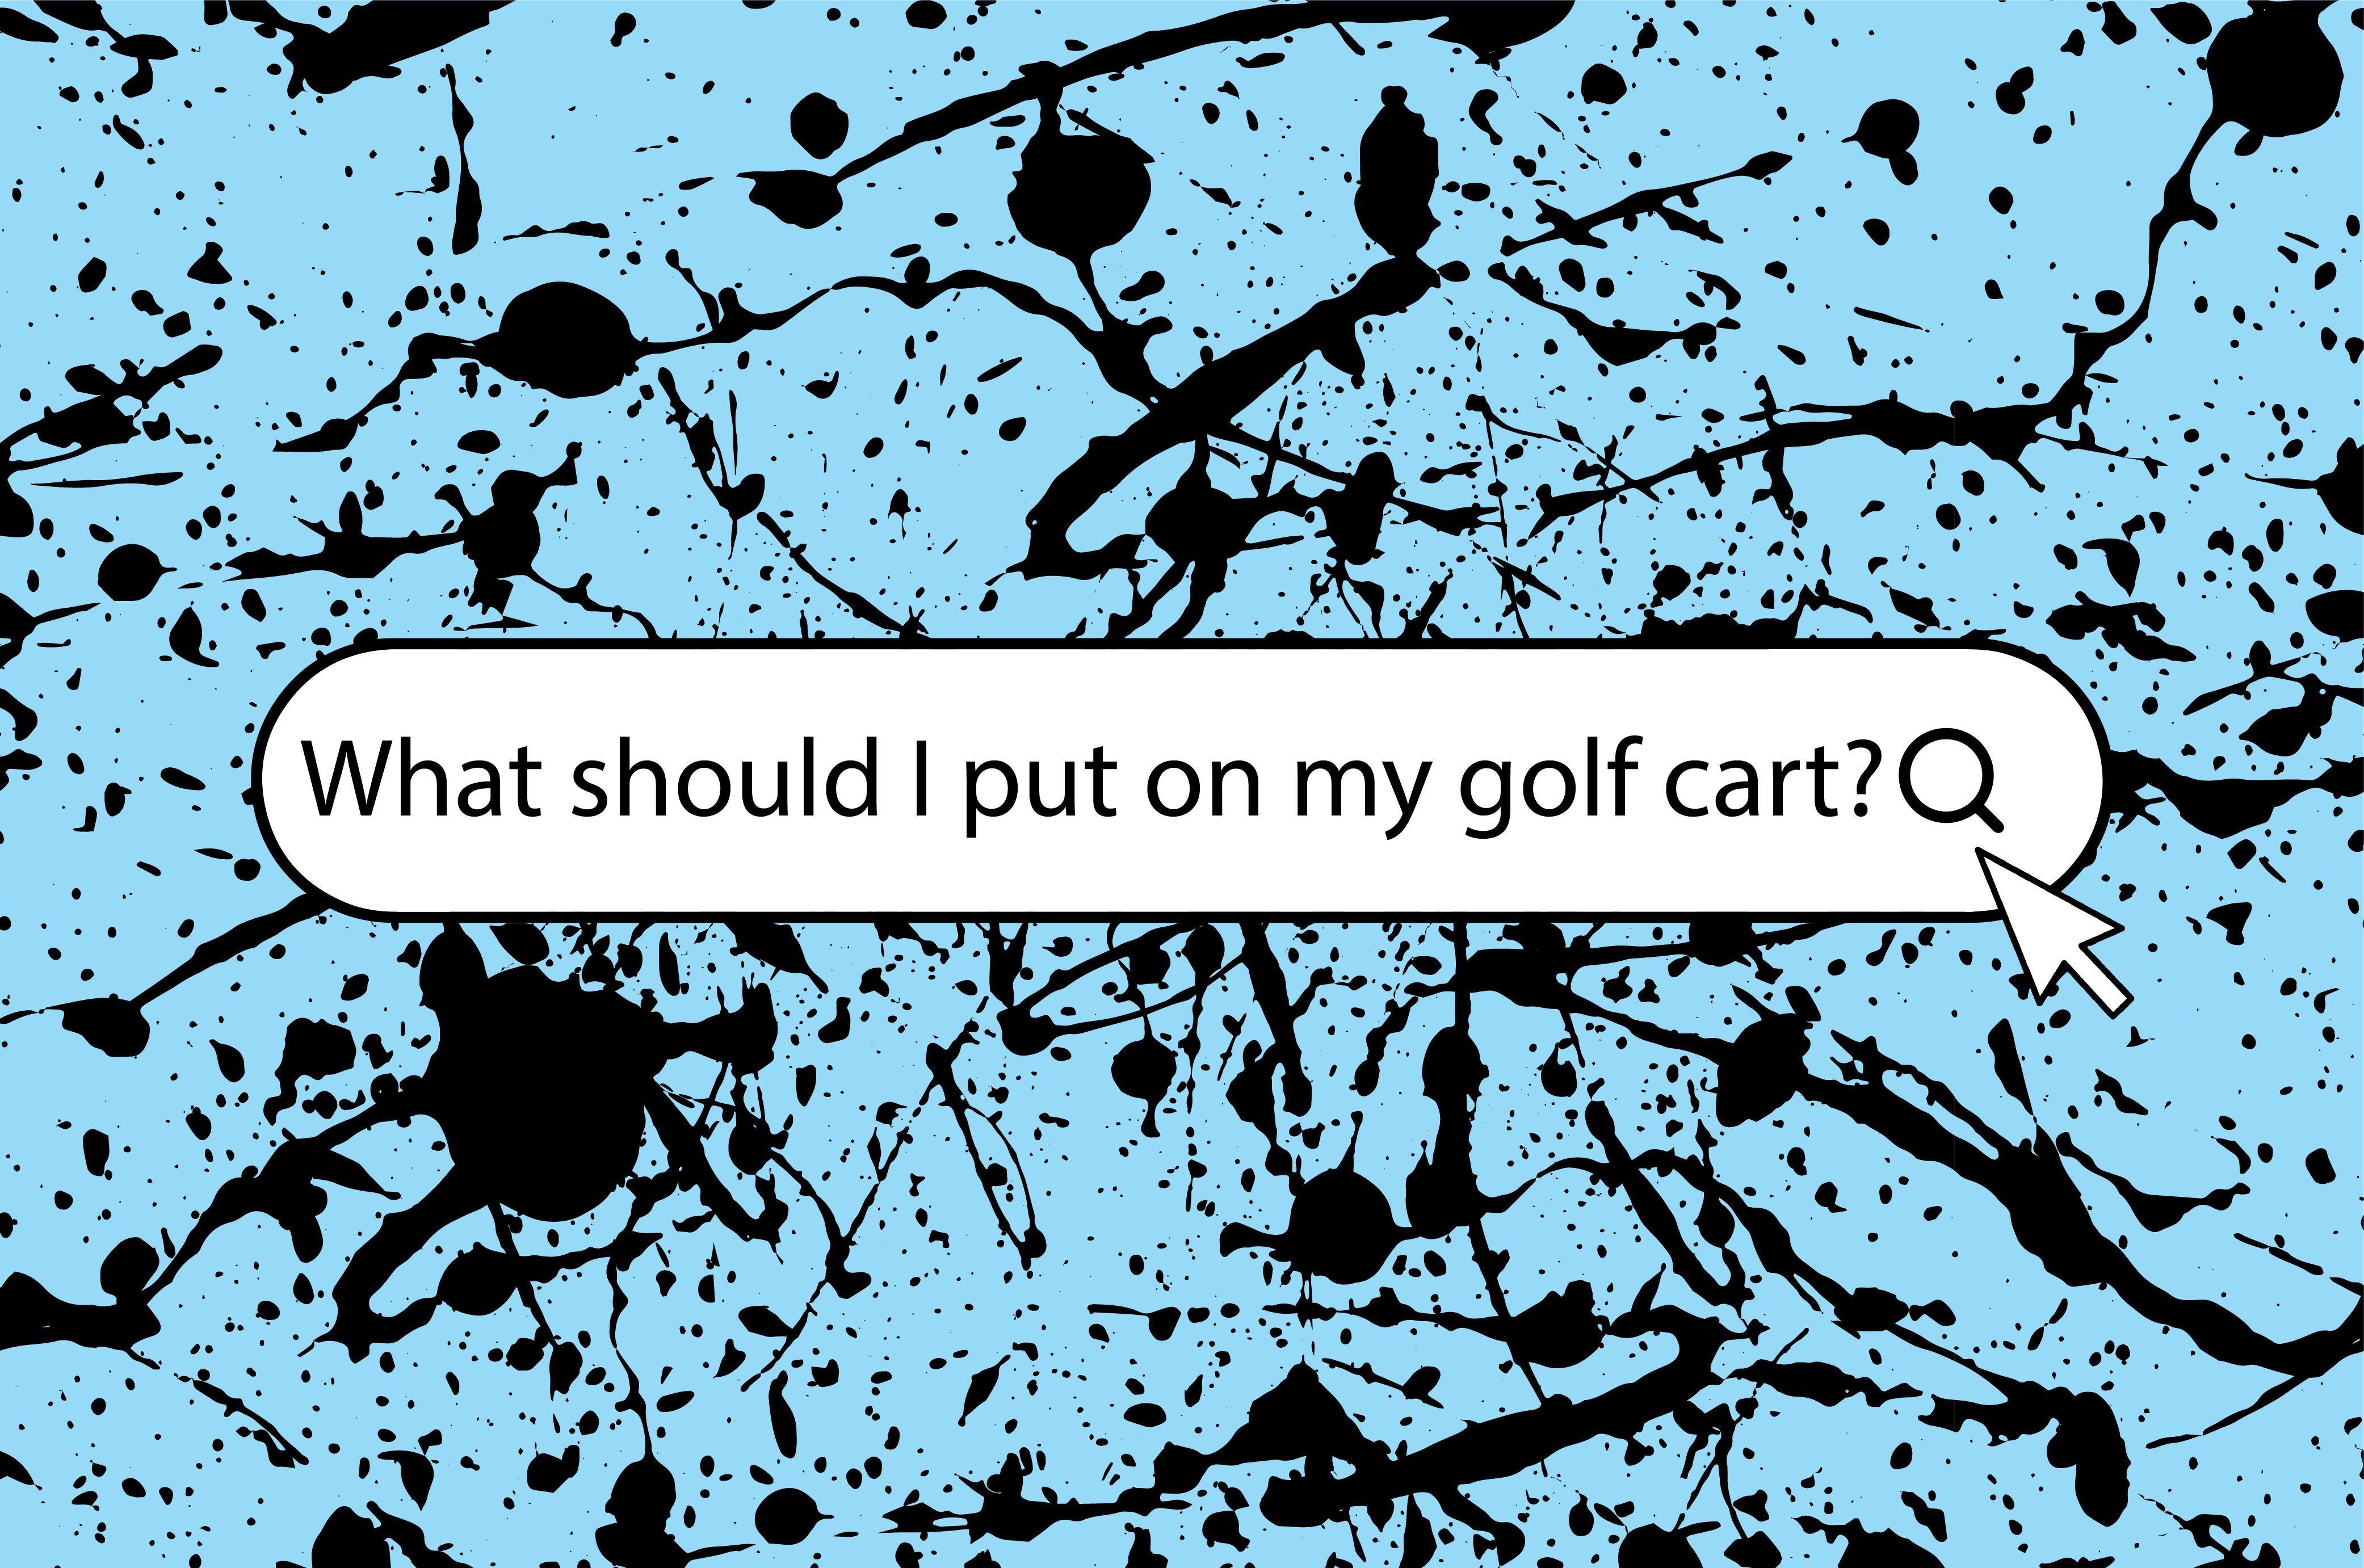 What should I put on my golf cart?